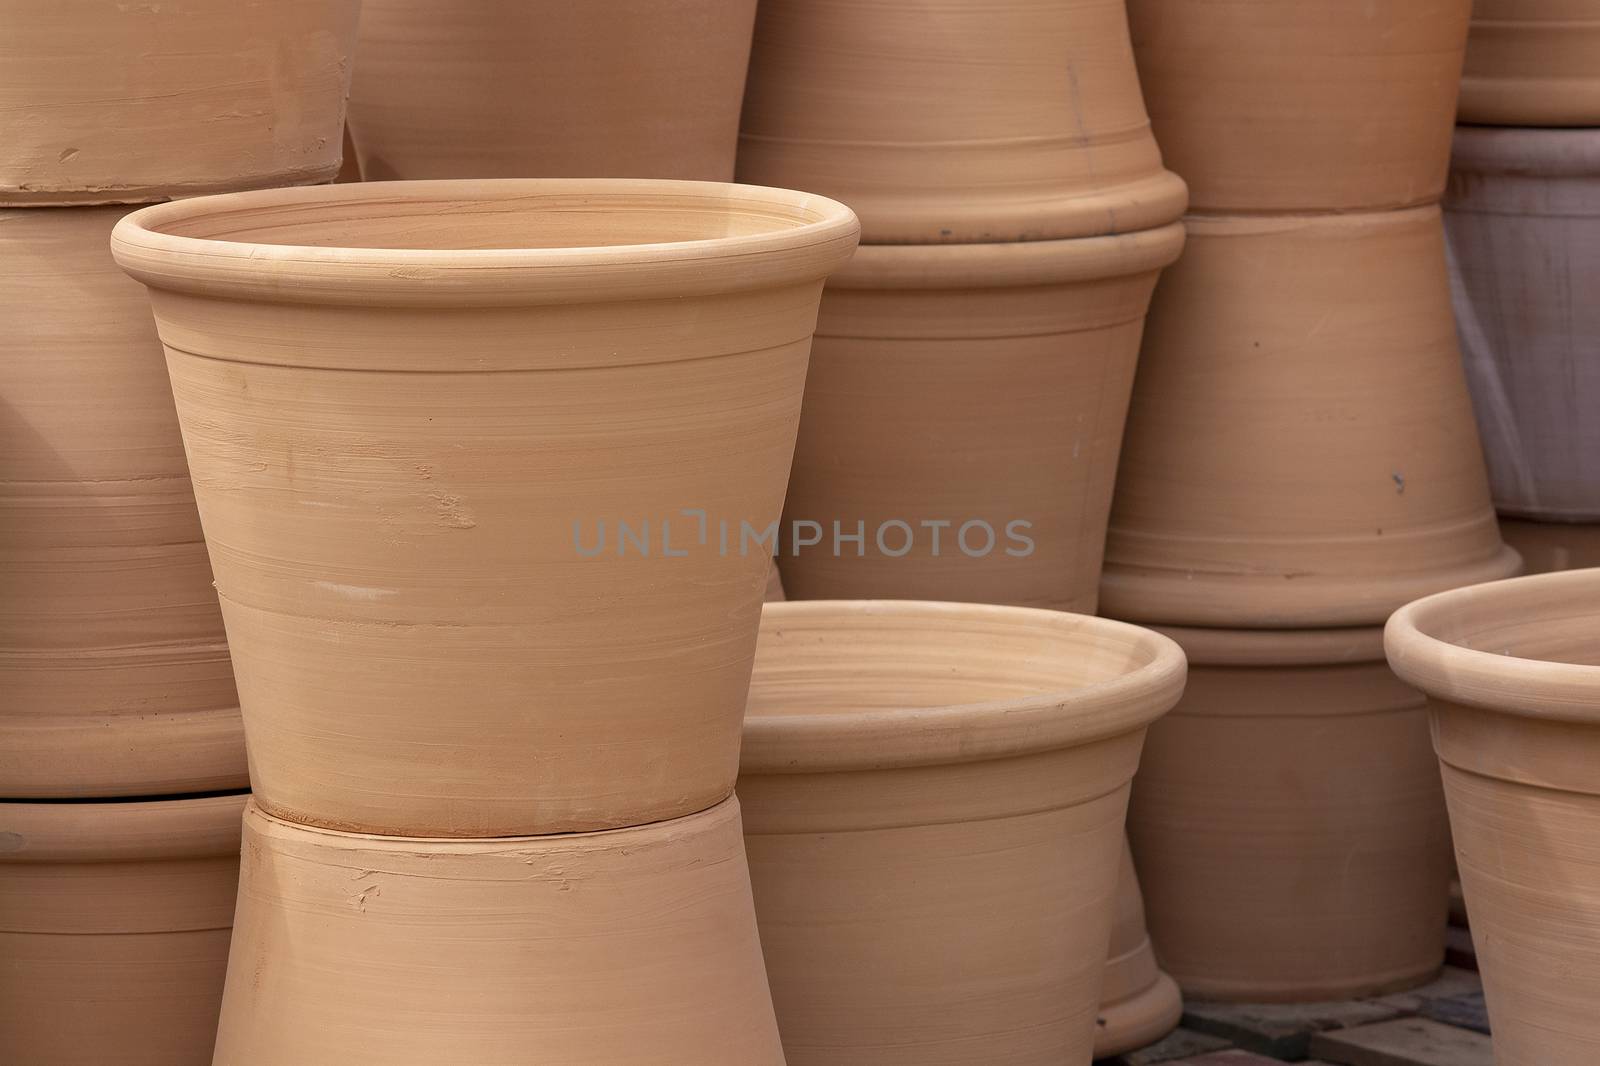 Rustic terracotta pots piled up on display closeup full frame